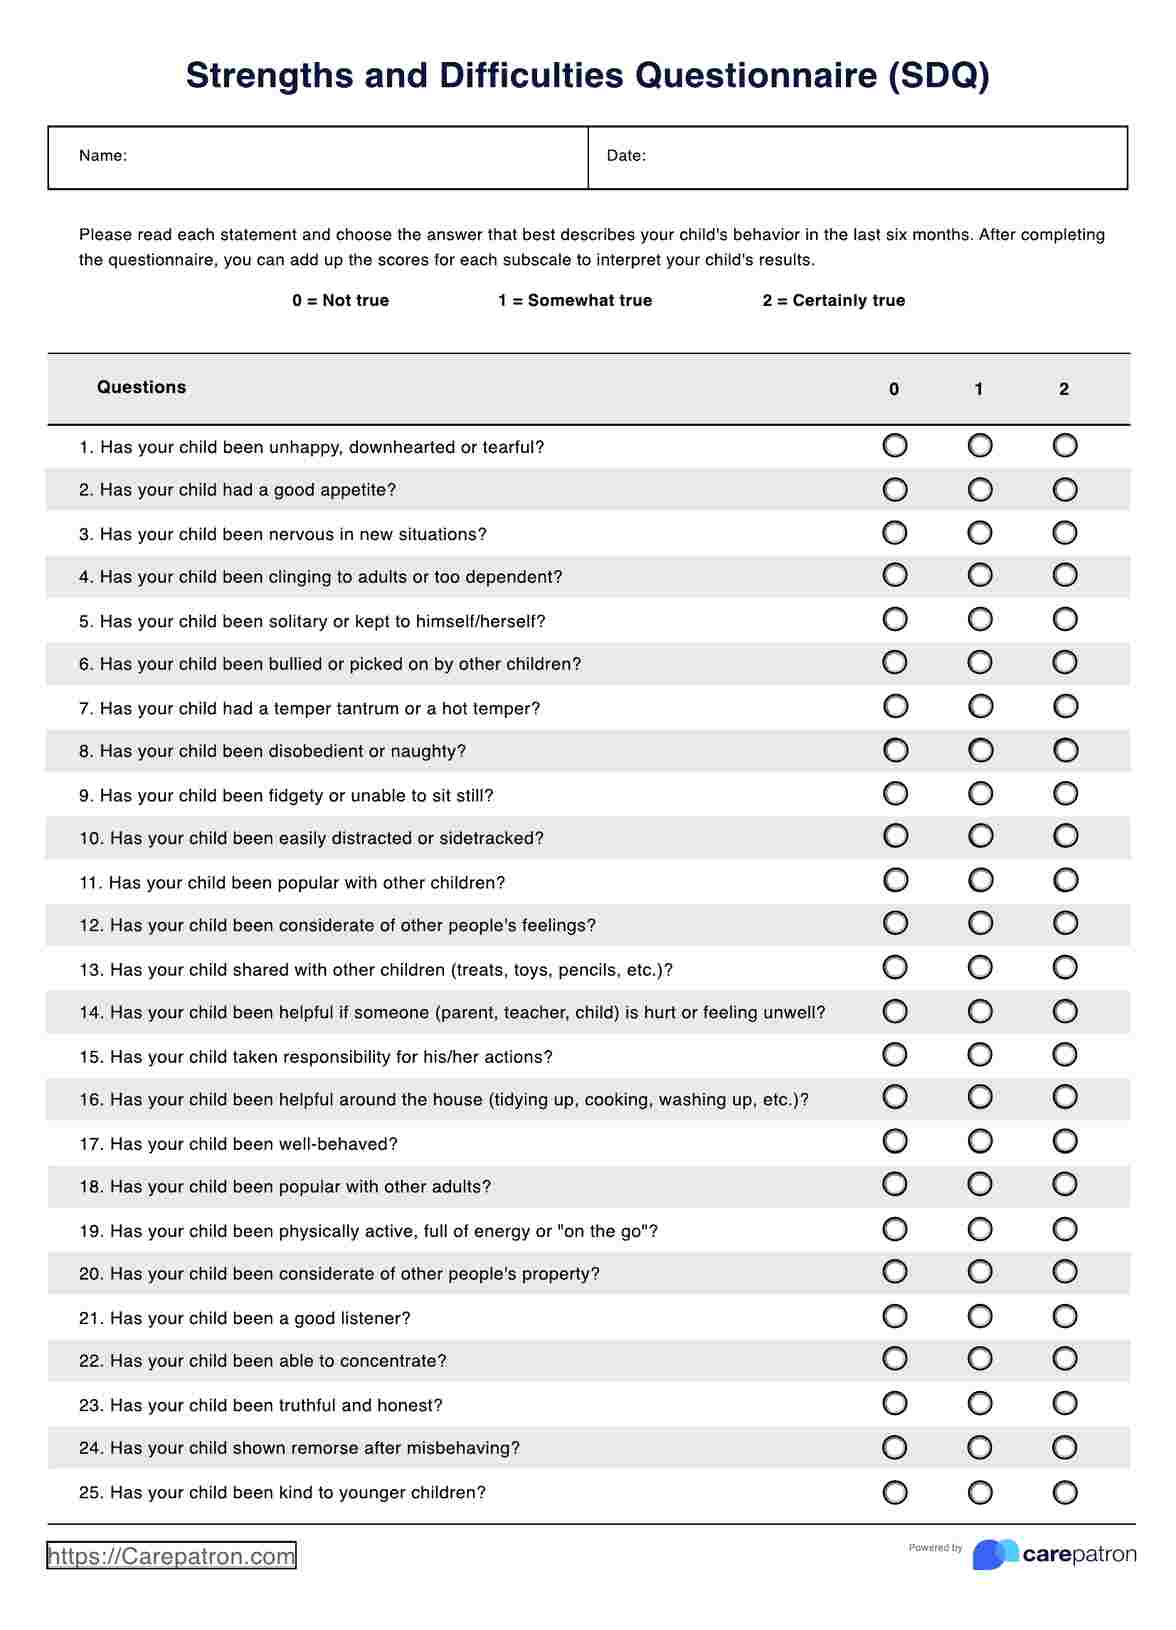 Strengths and Difficulties Questionnaire PDF Example